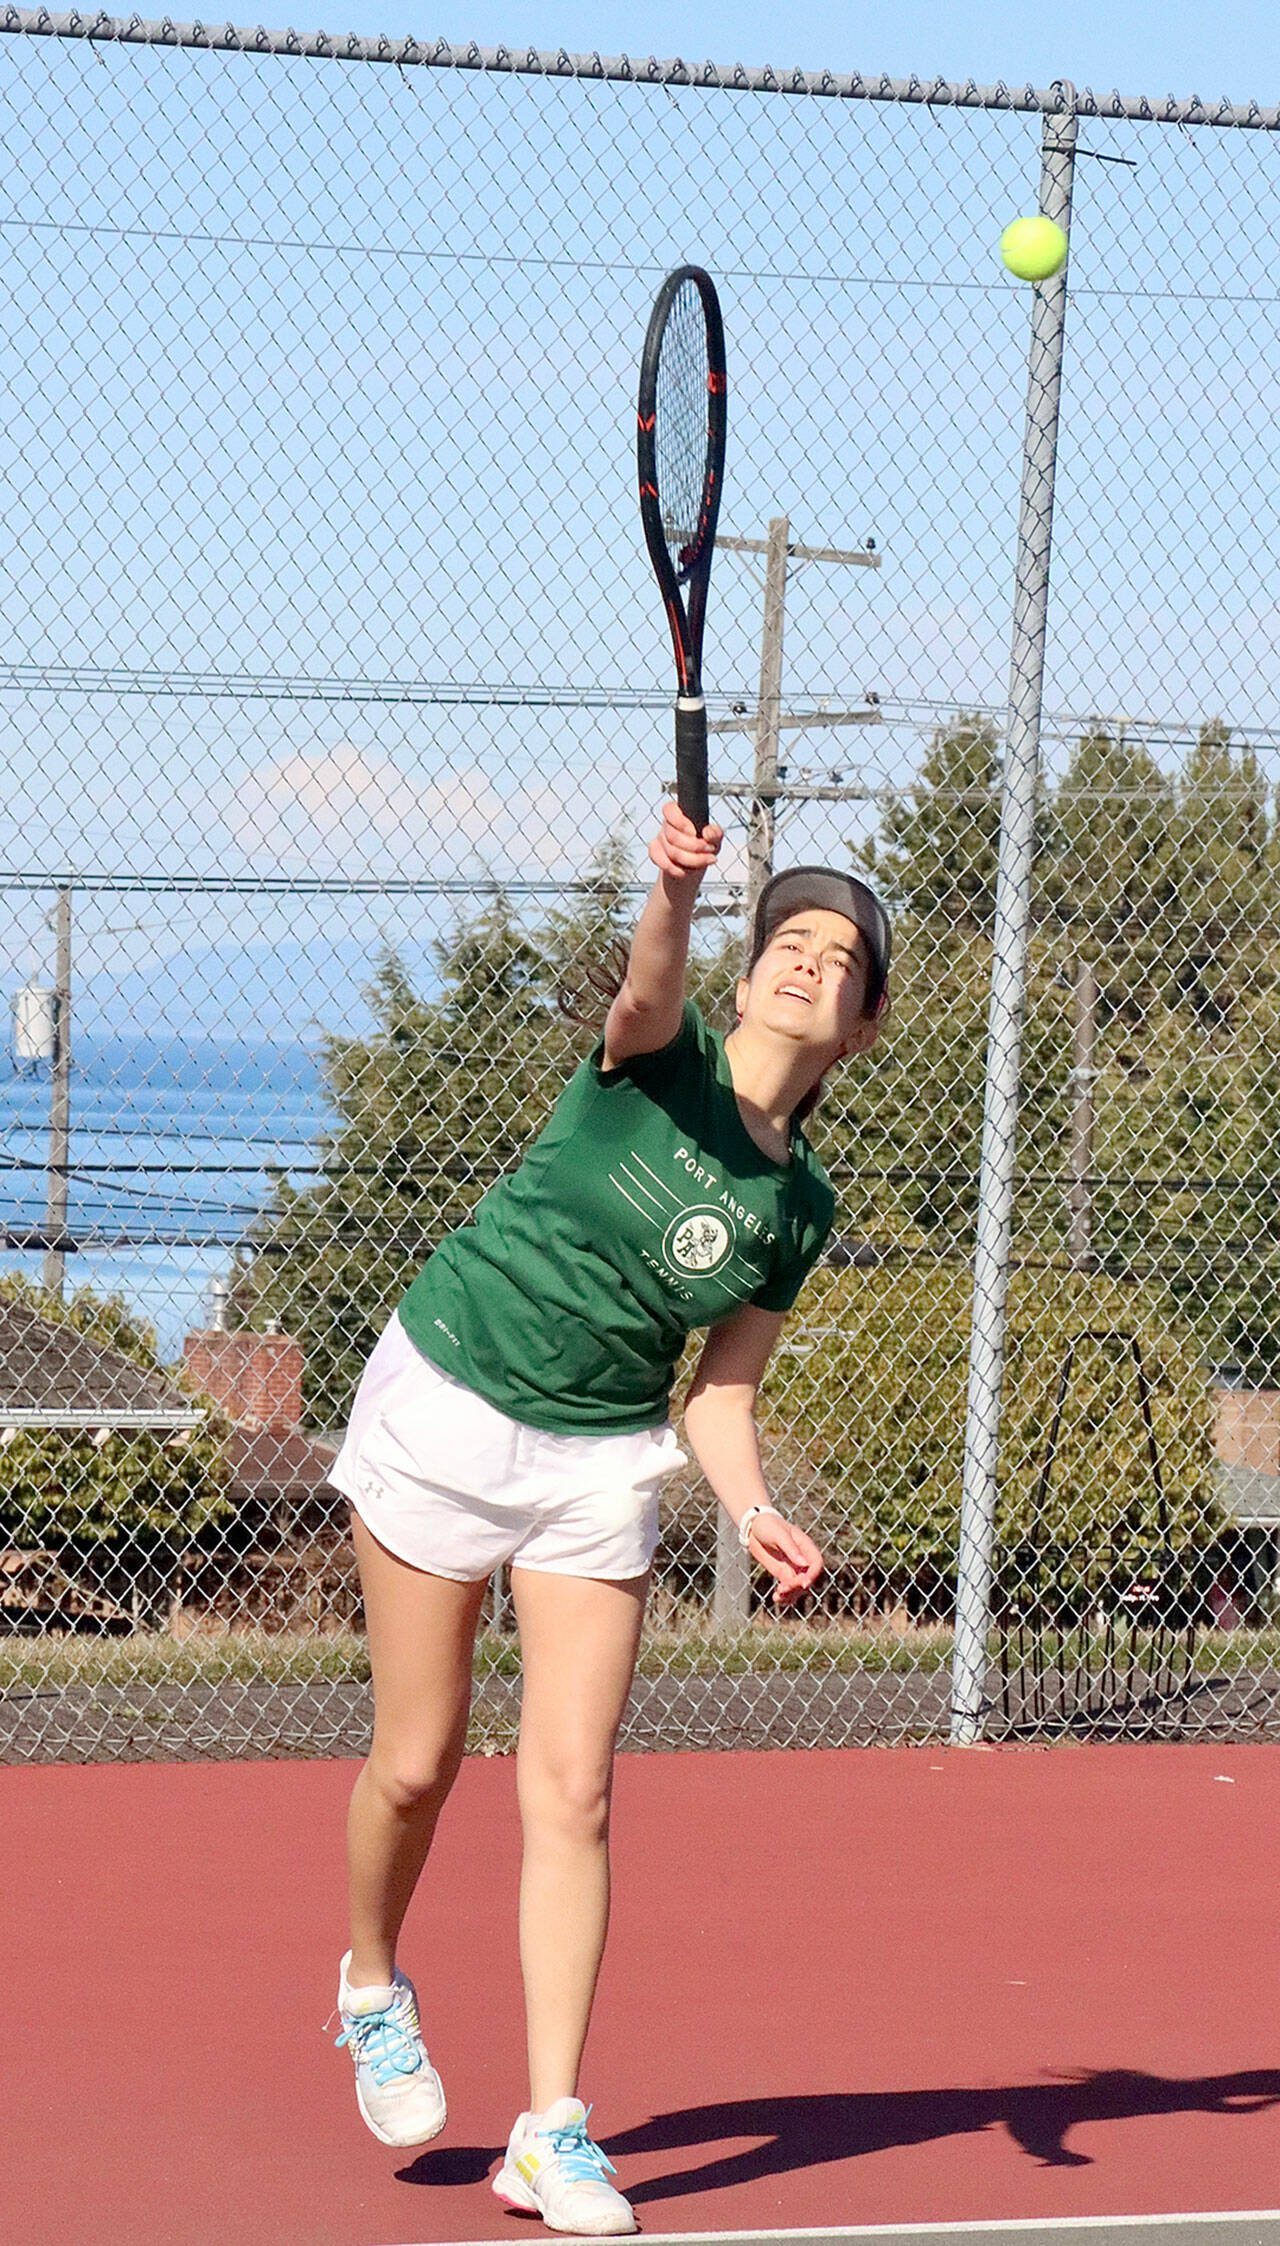 Port Angeles’ Liberty Lauer serves in her No. 1 singles match against Alissa Doyle of Kingston Monday. (Dave Logan/for Peninsula Daily News)